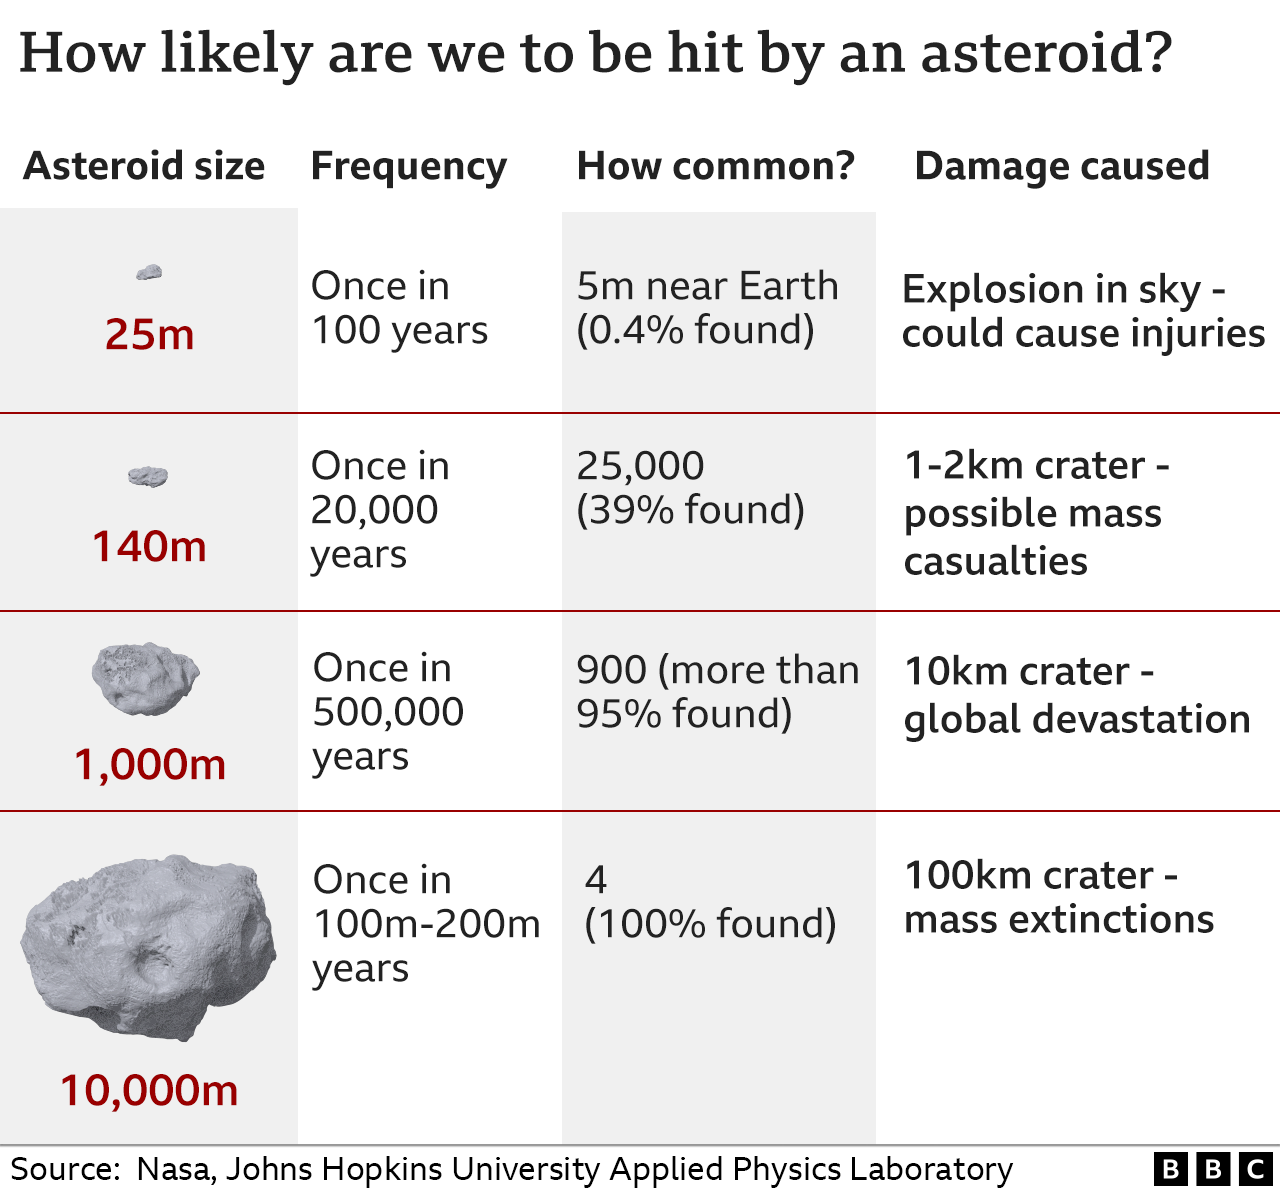 How likely are we to be hit by an asteroid?